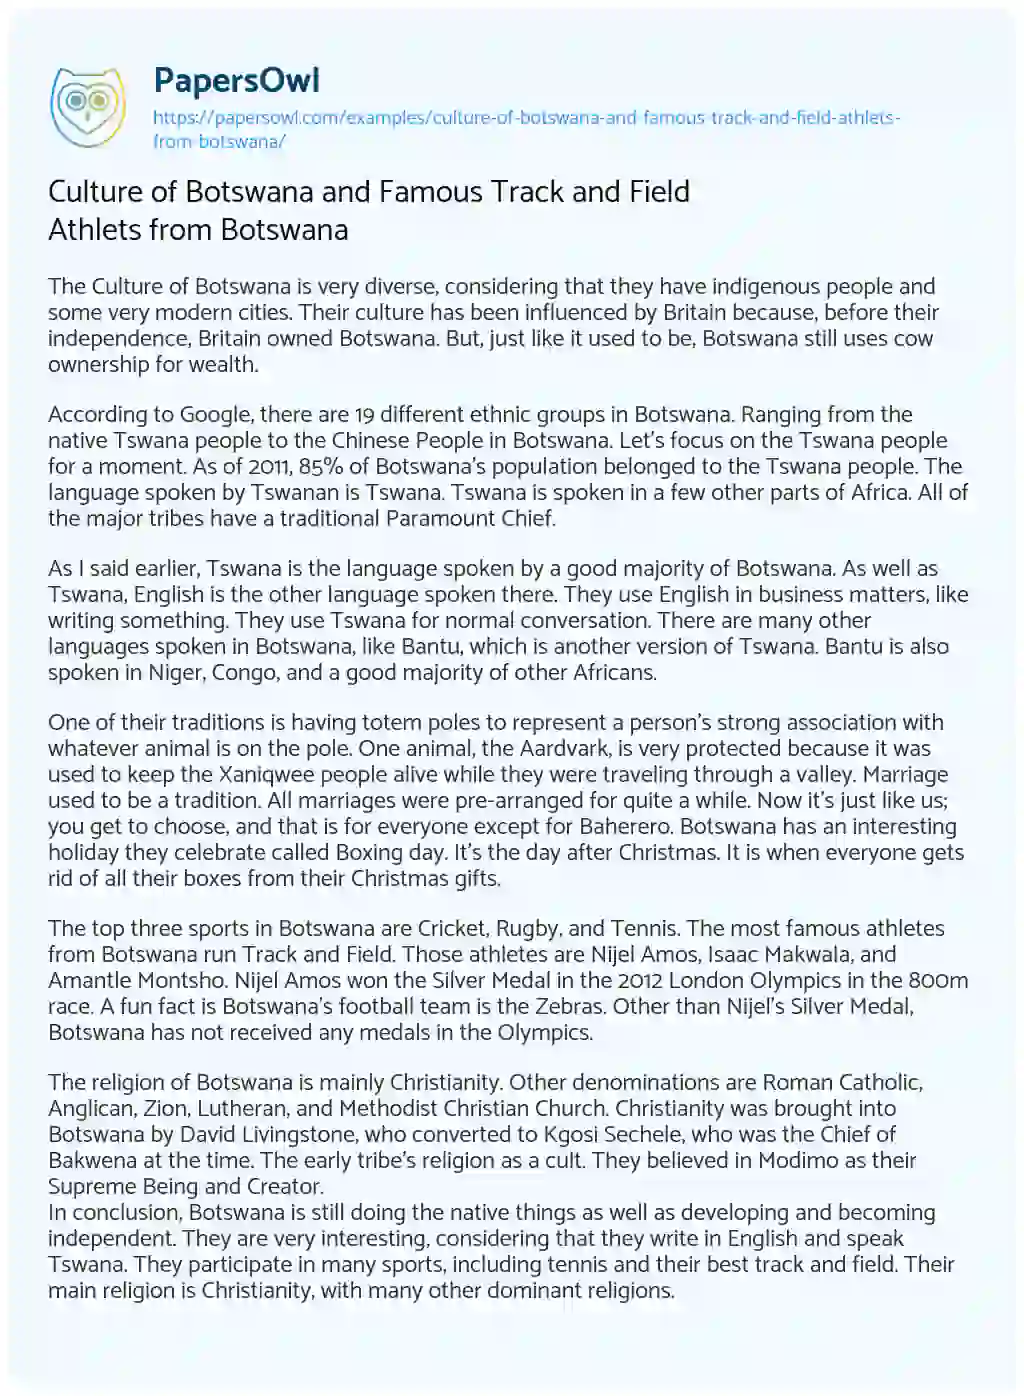 Essay on Culture of Botswana and Famous Track and Field Athlets from Botswana